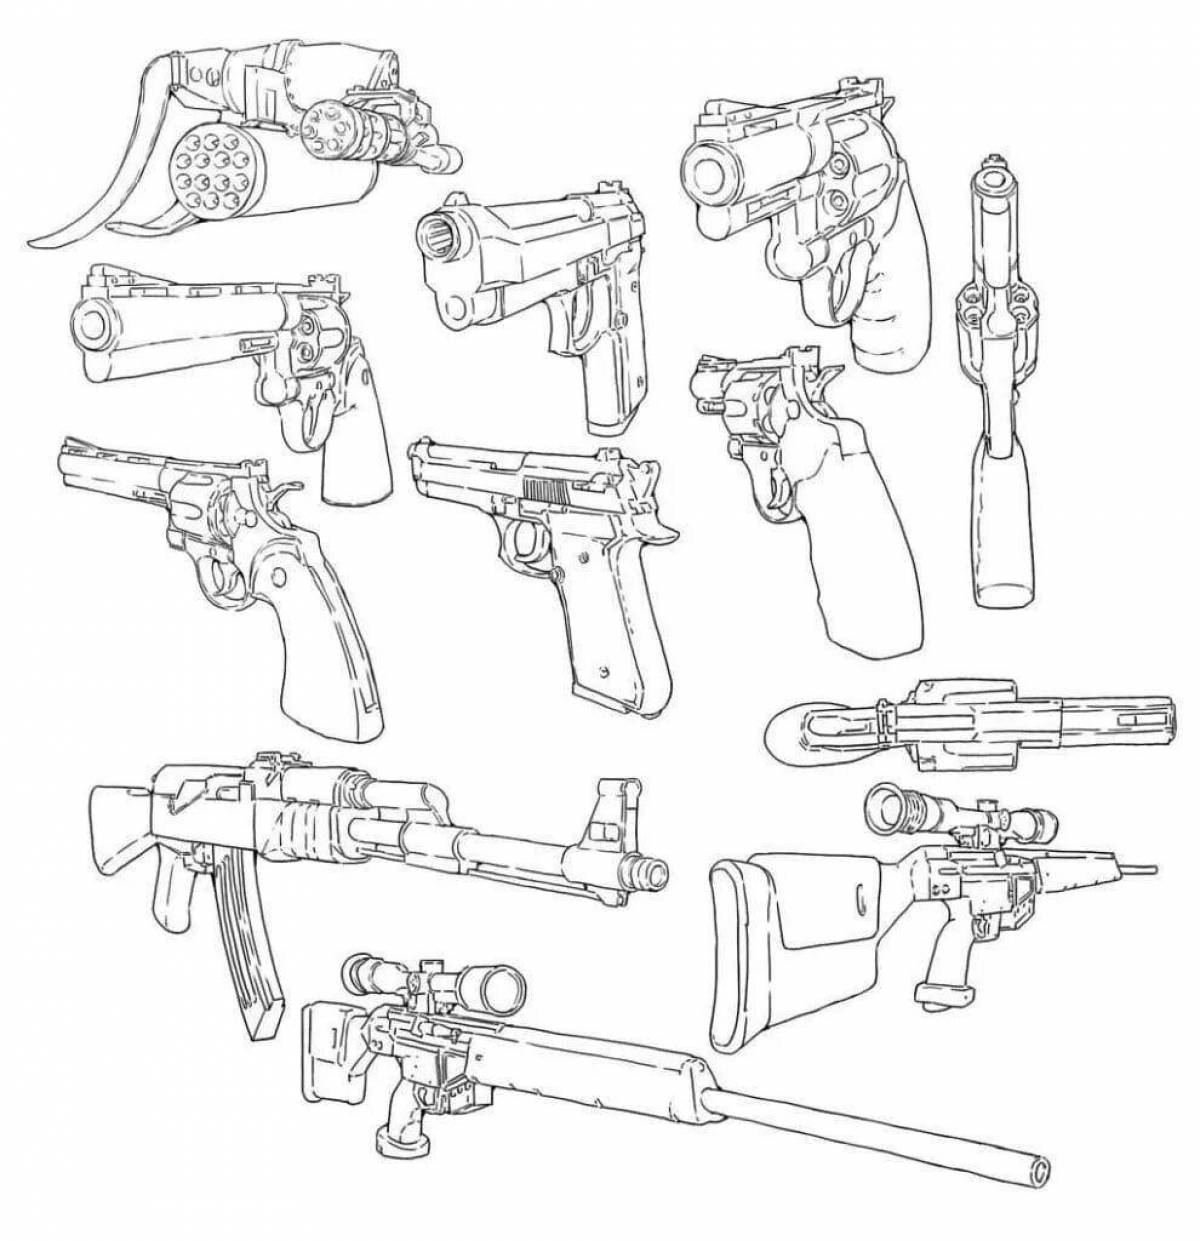 Impressive weapon coloring page